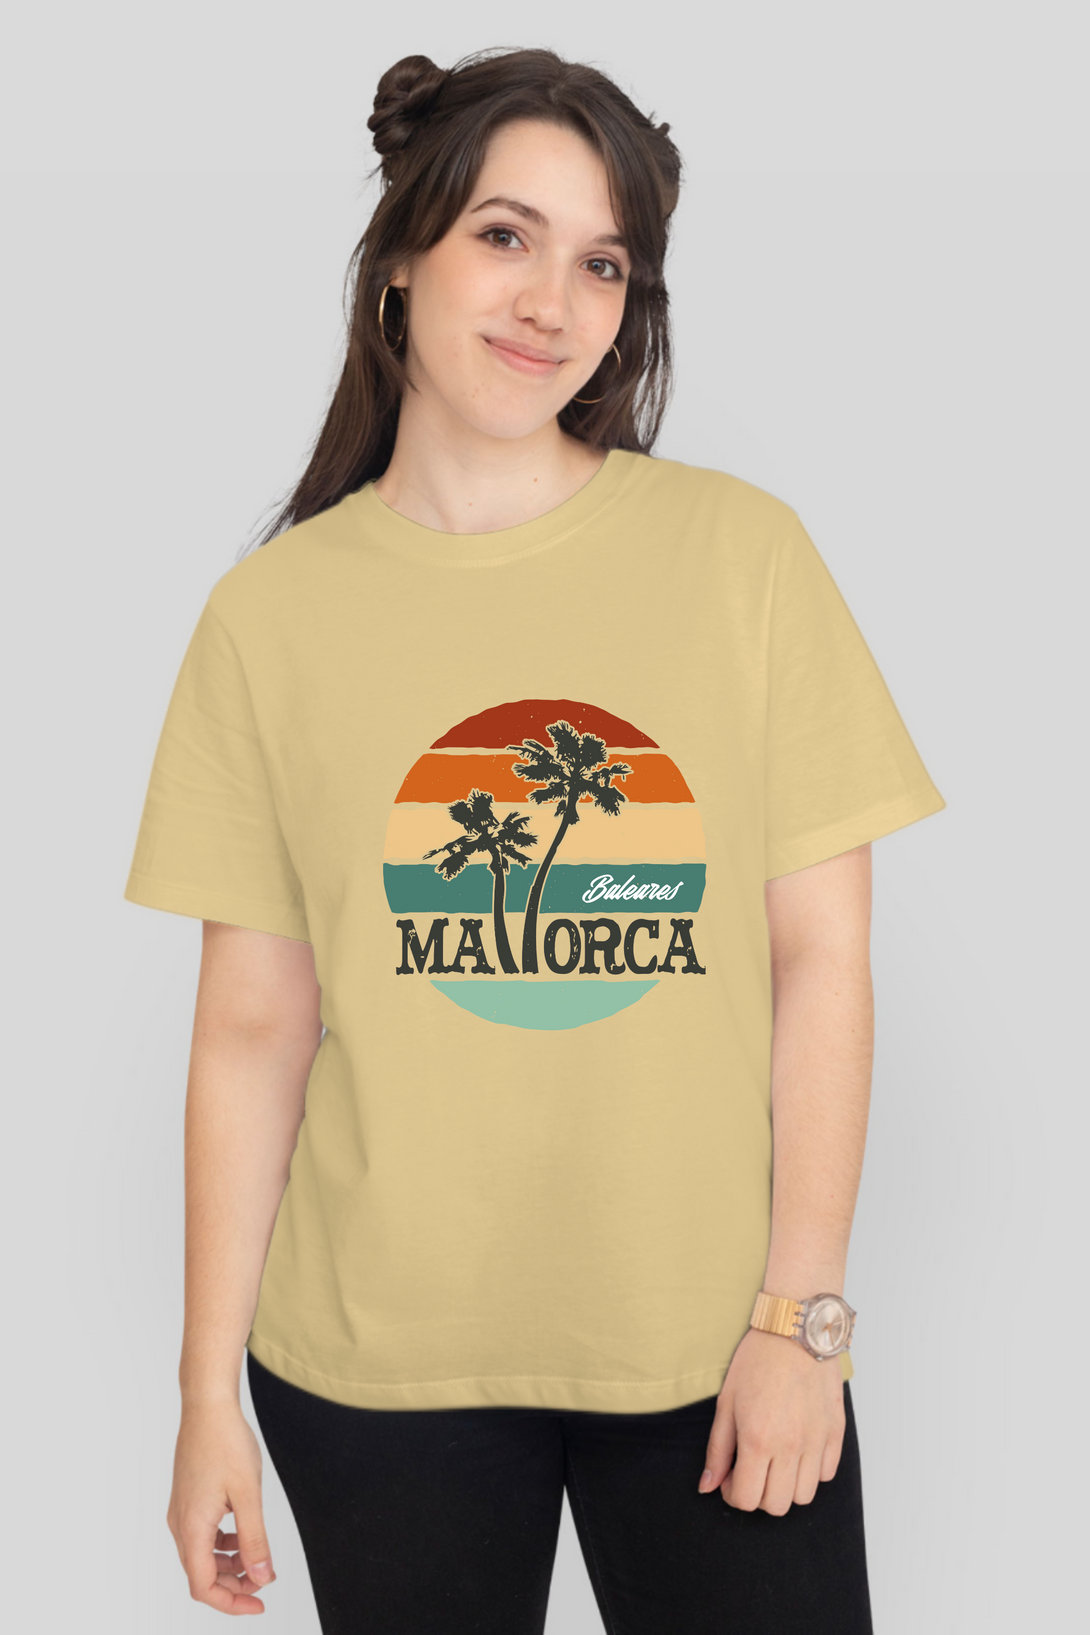 Mallorca And Palm Printed T-Shirt For Women - WowWaves - 8